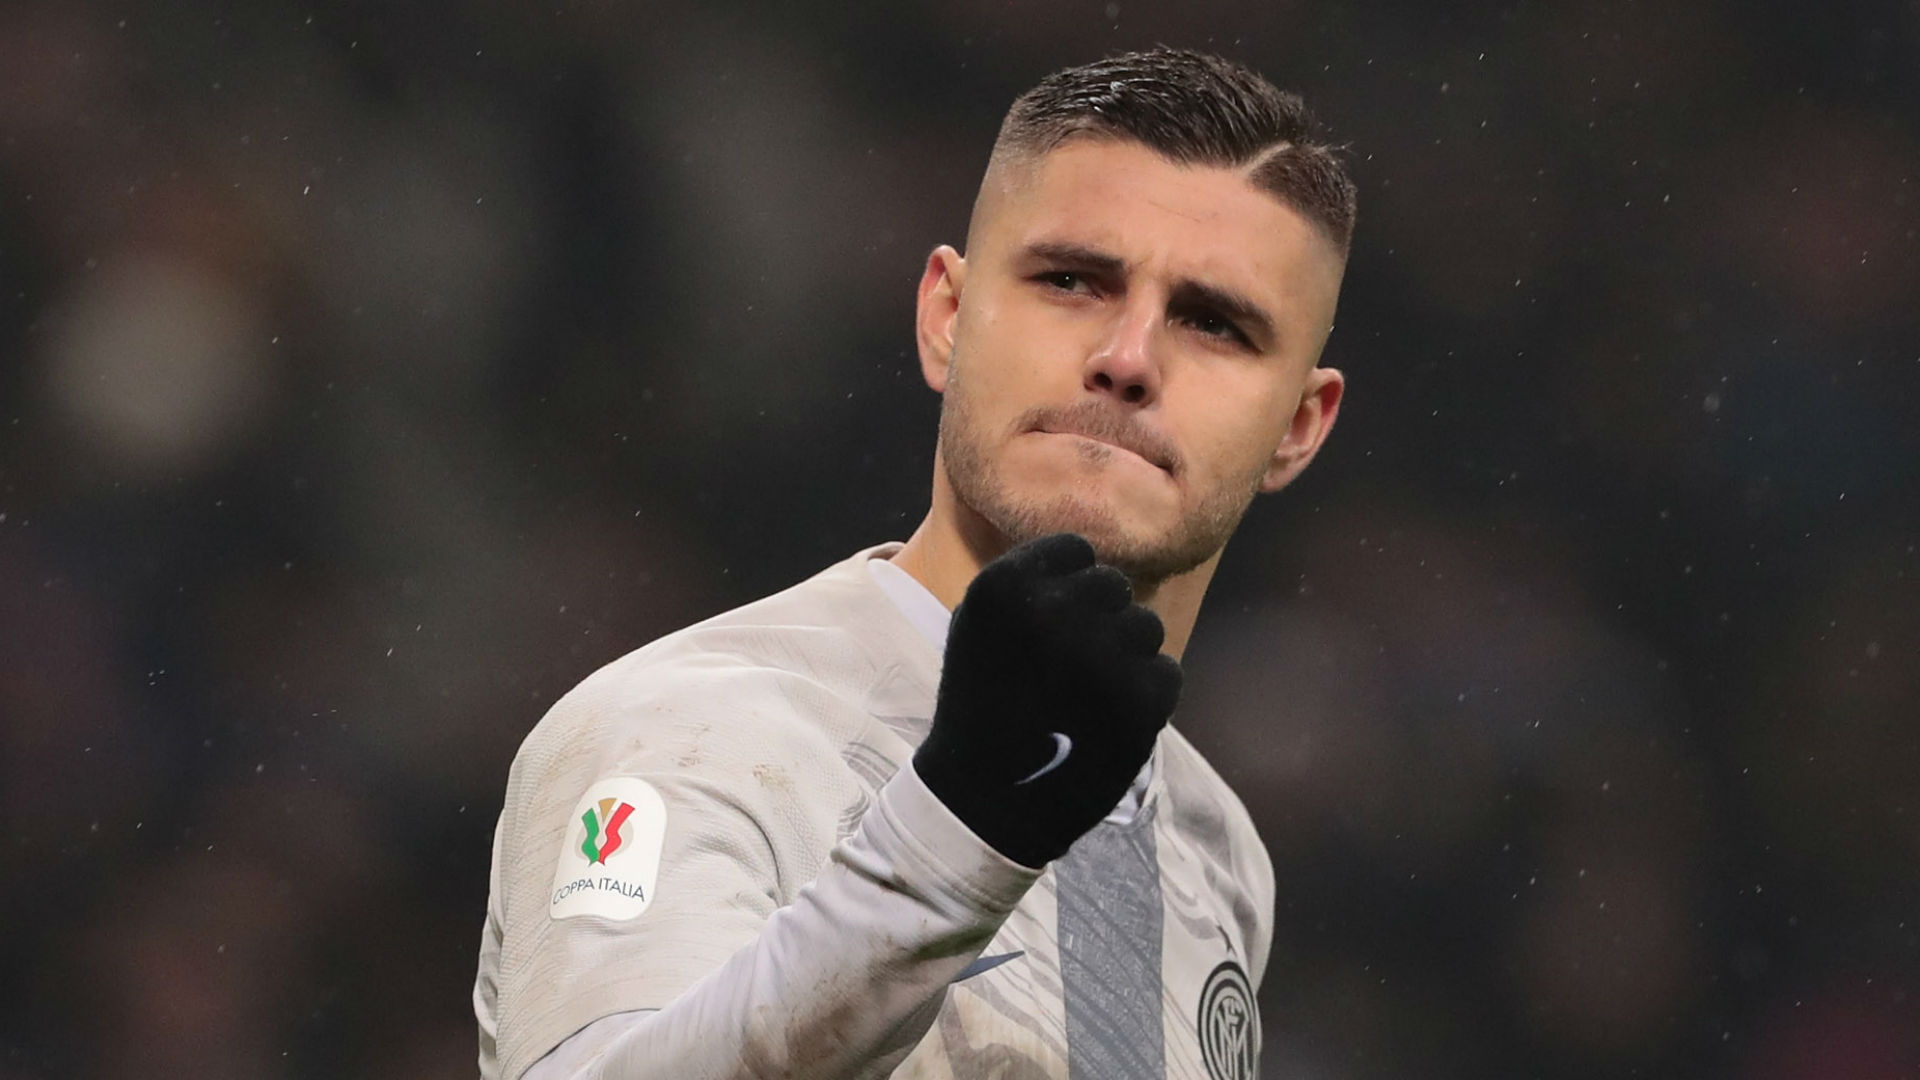 Mauro Icardi has not played for Inter since early February amid doubts over his future at San Siro.